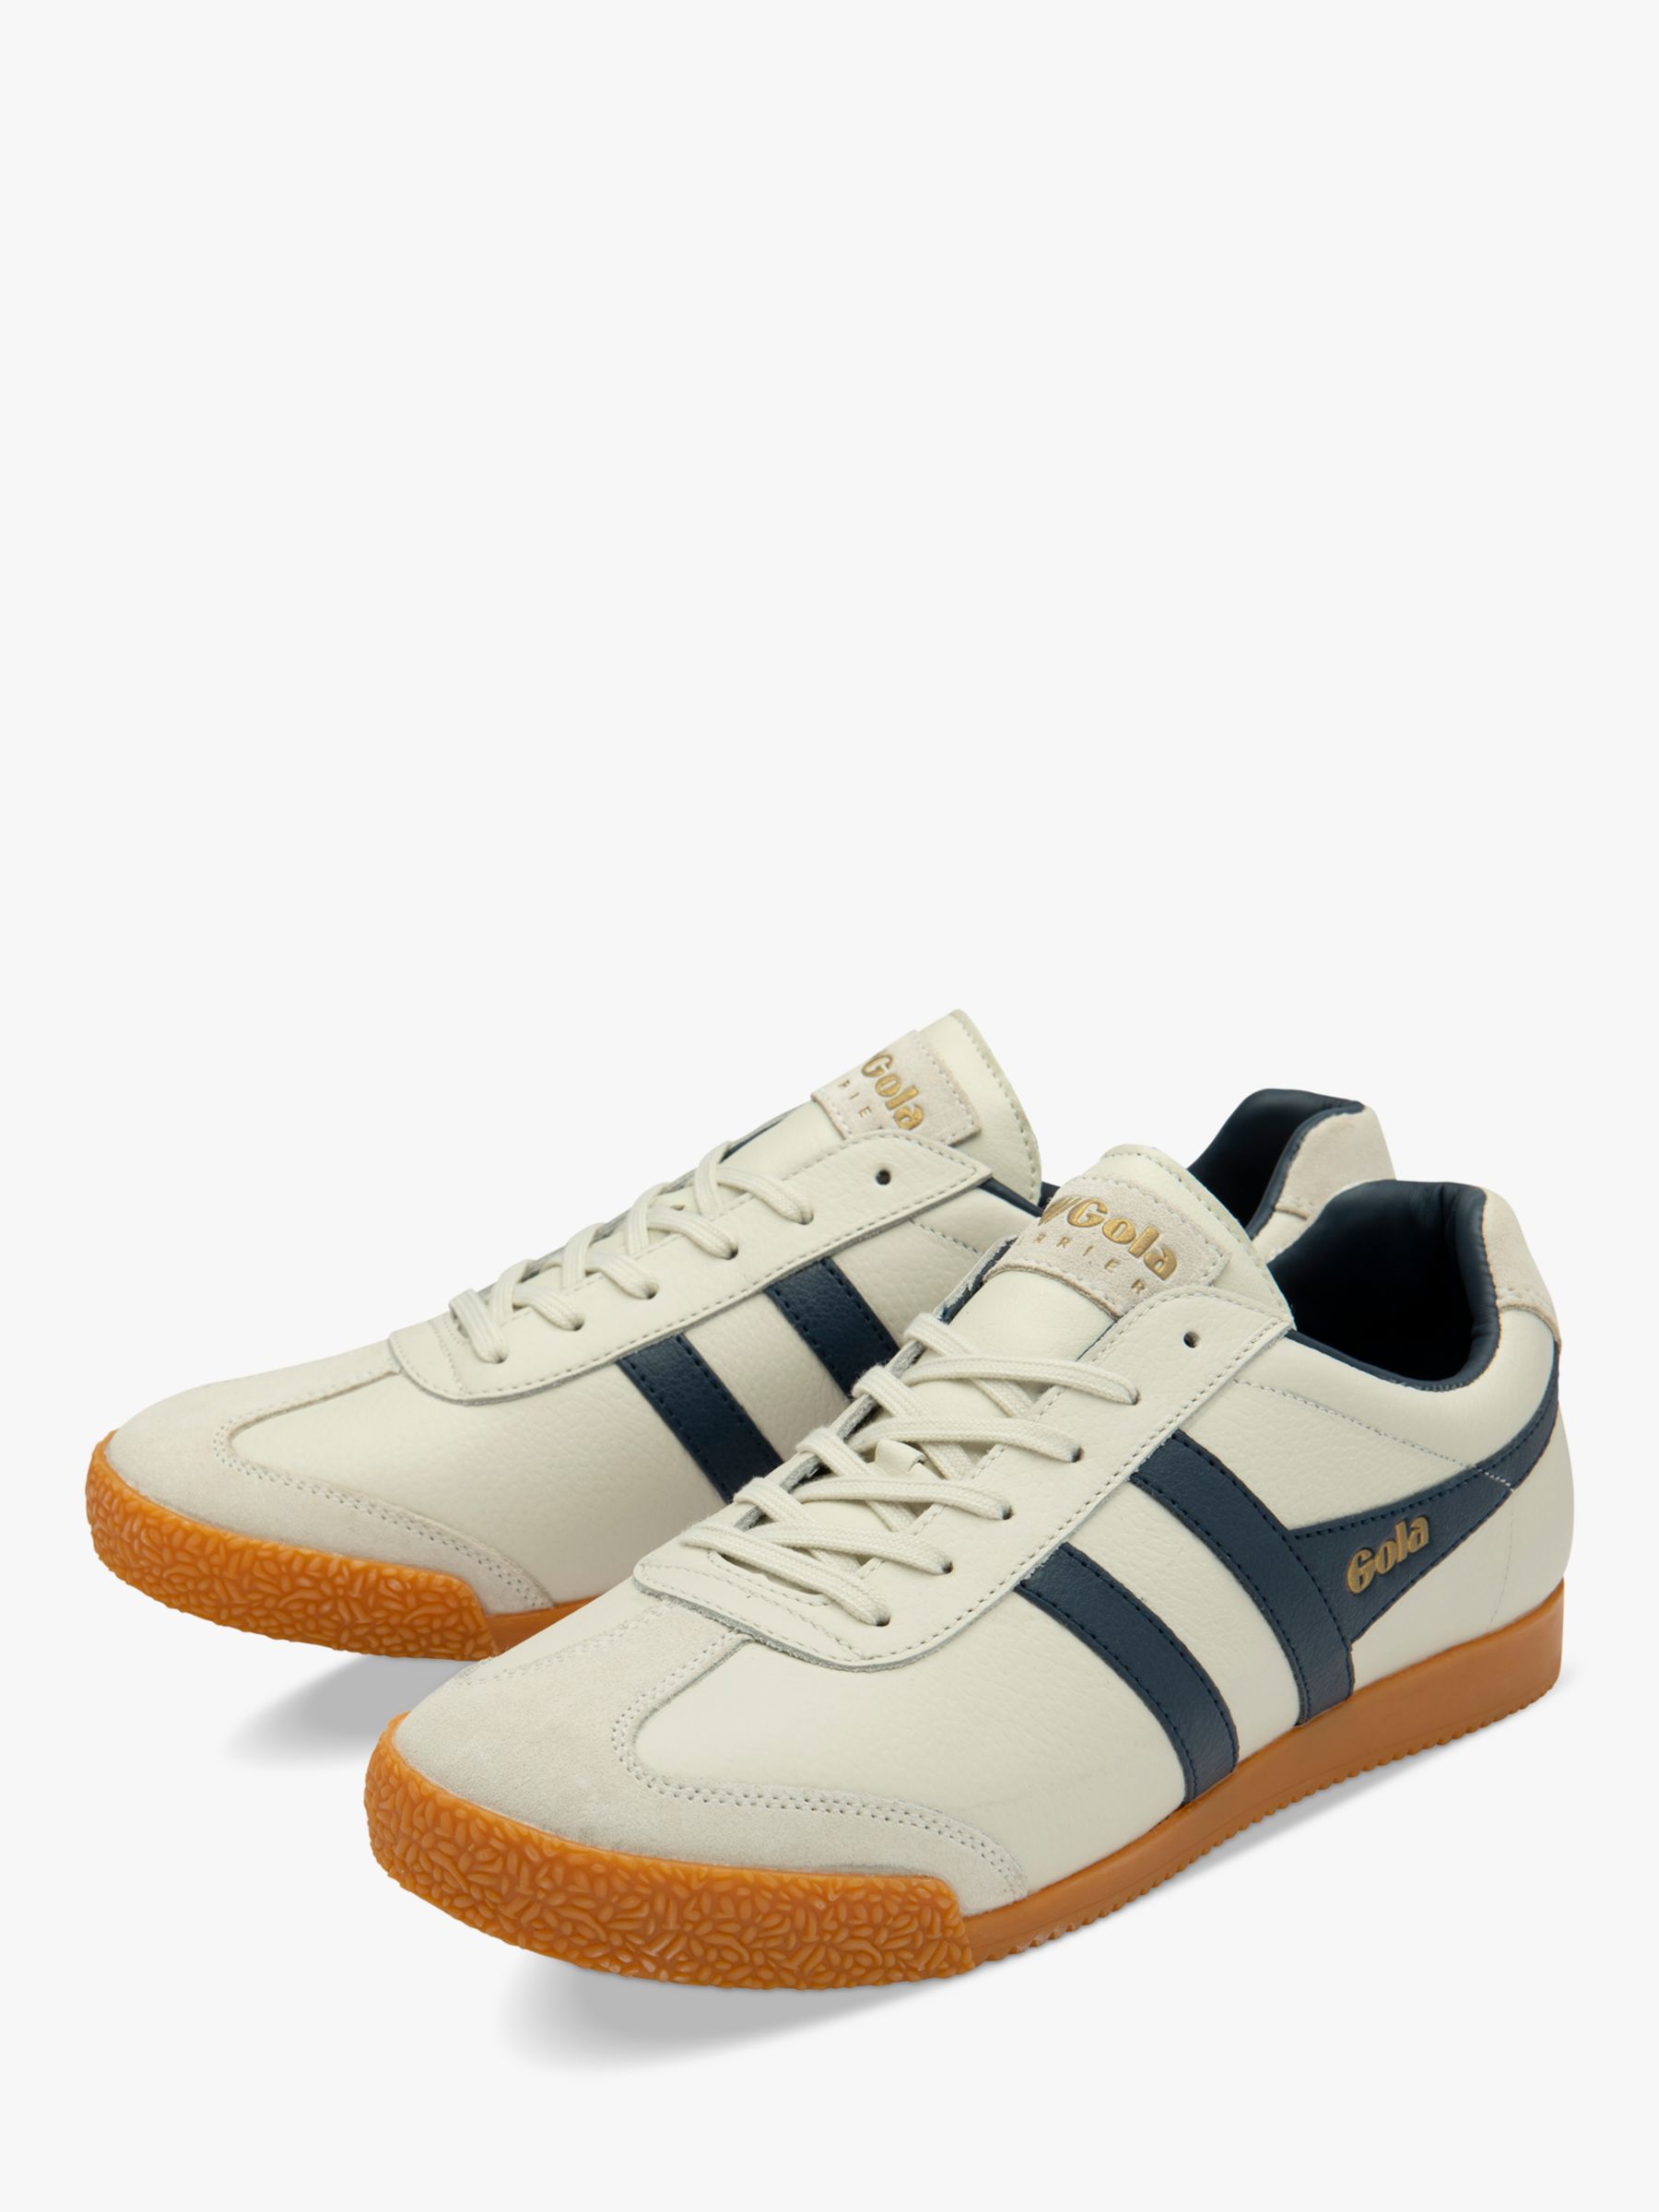 Buy Gola Classics Harrier Leather Lace Up Trainers, Off White/Navy Online at johnlewis.com